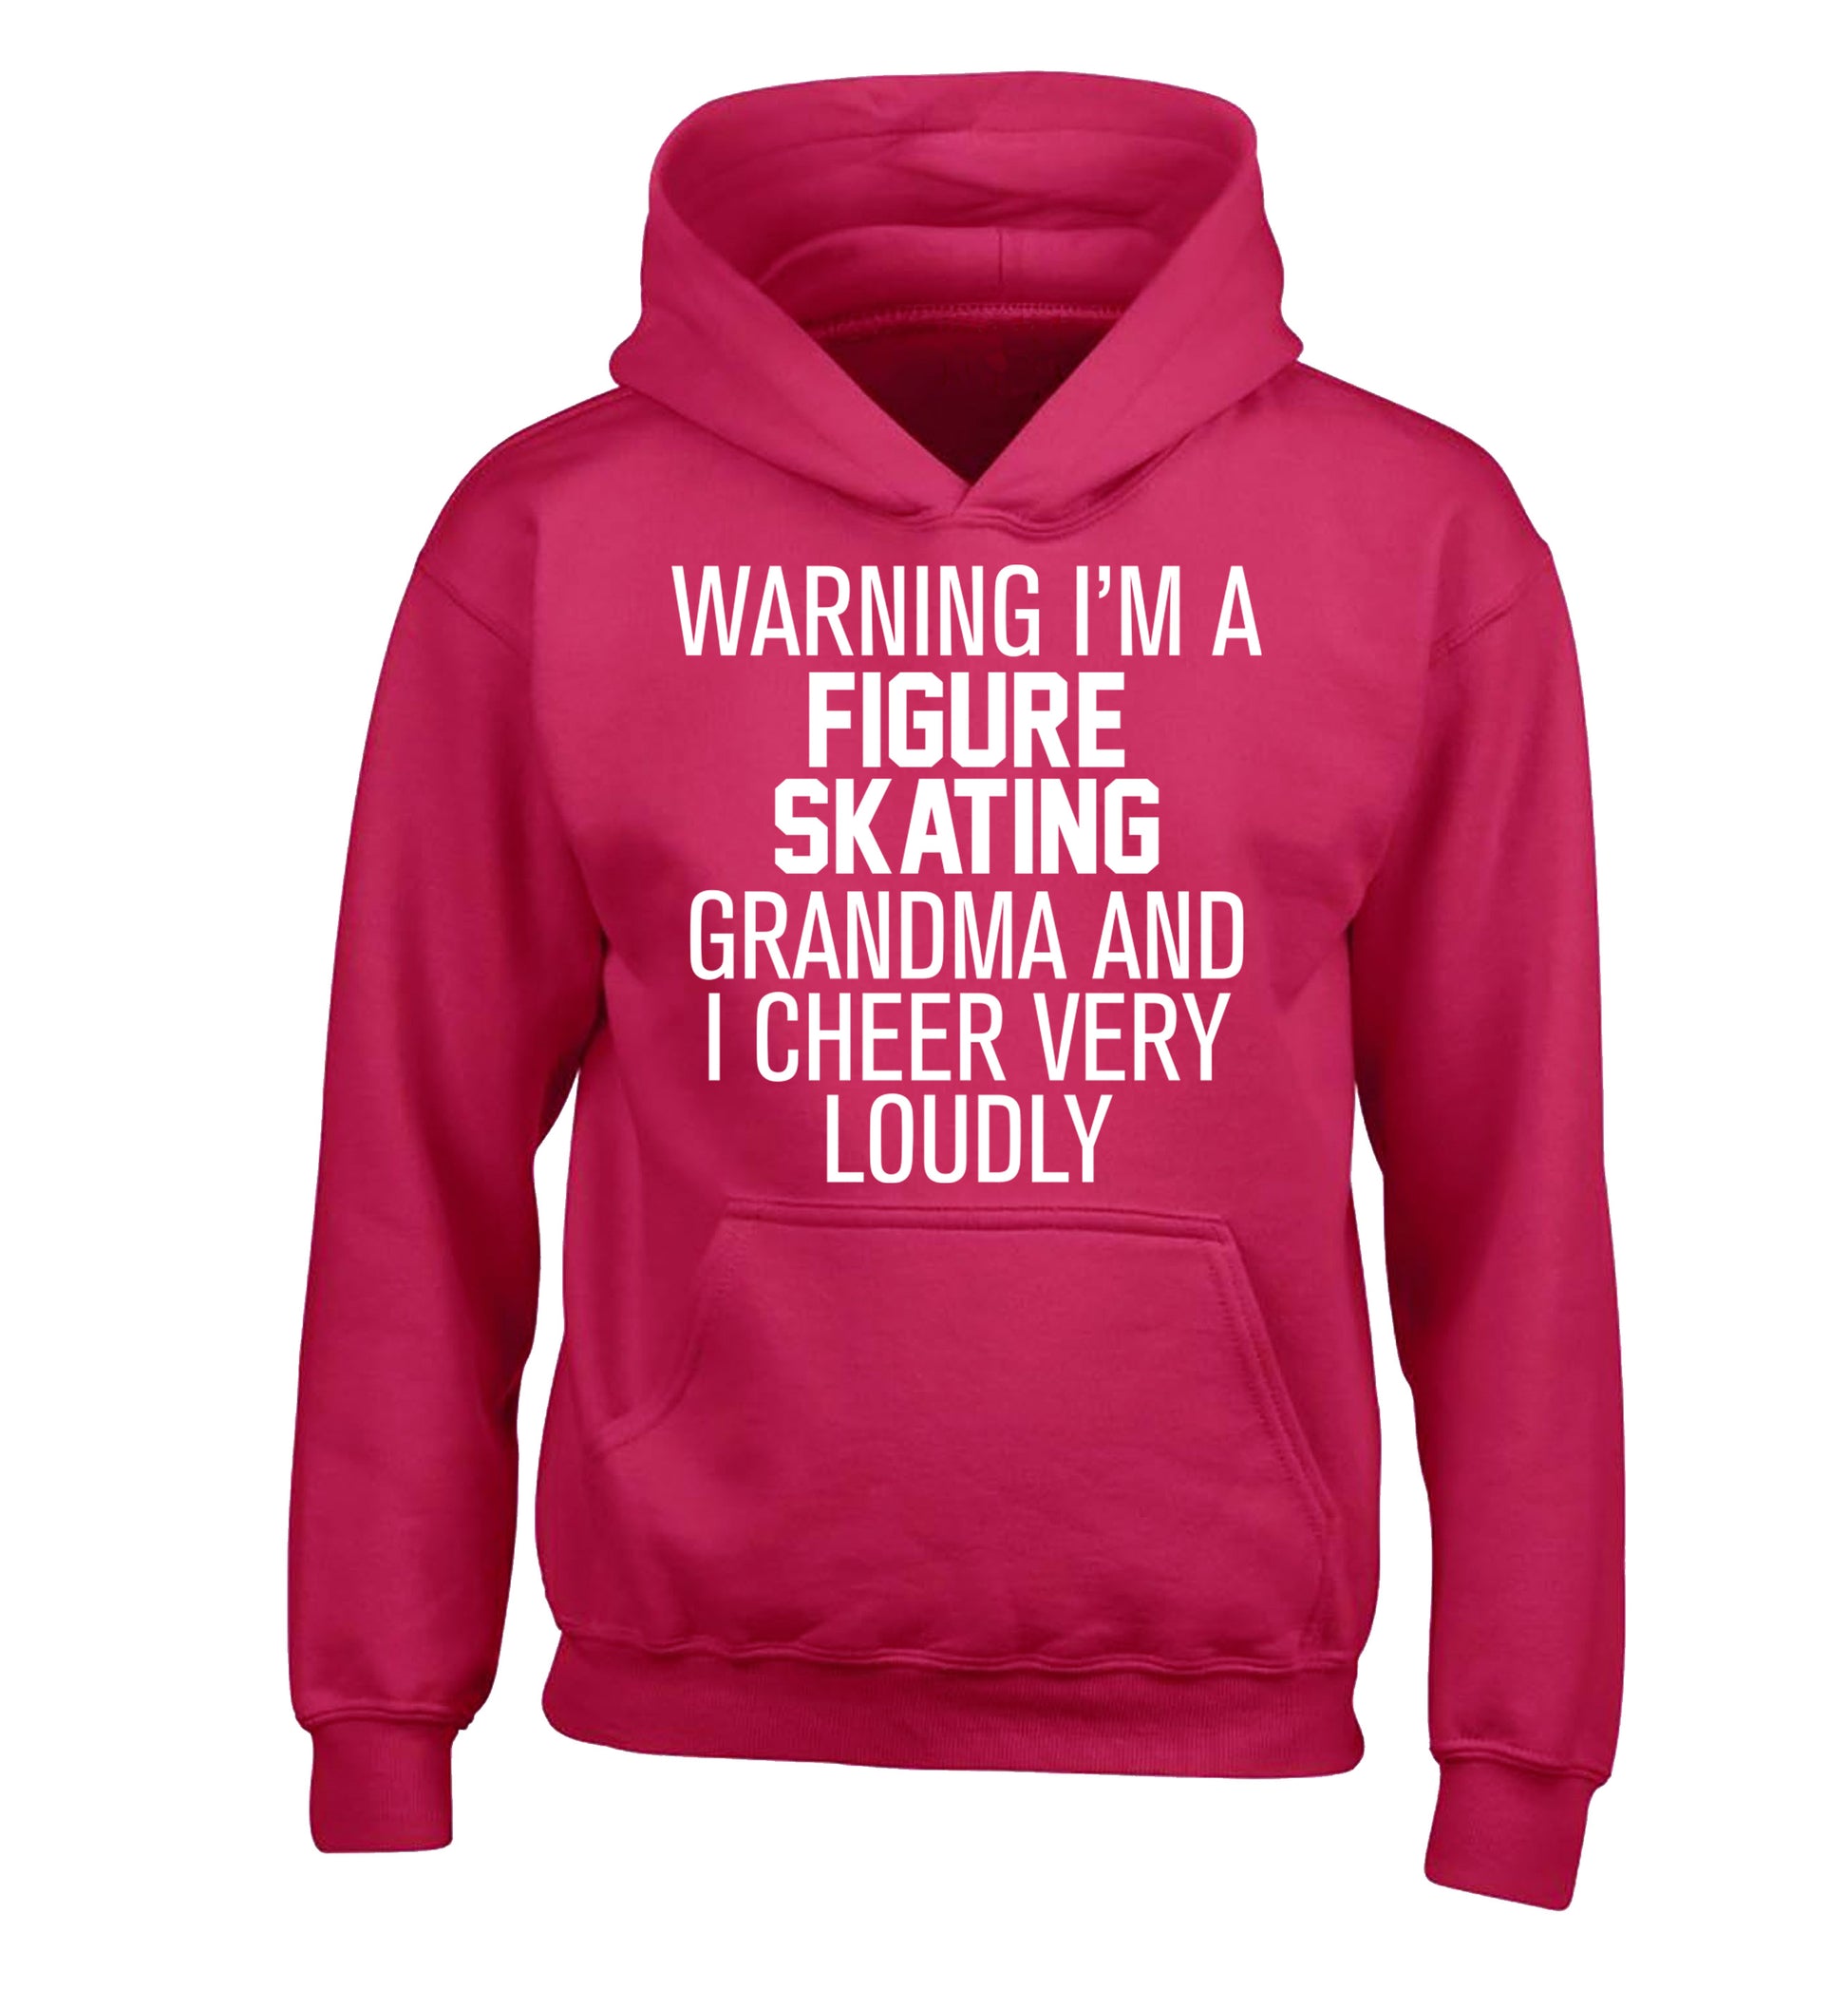 Warning I'm a figure skating grandma and I cheer very loudly children's pink hoodie 12-14 Years